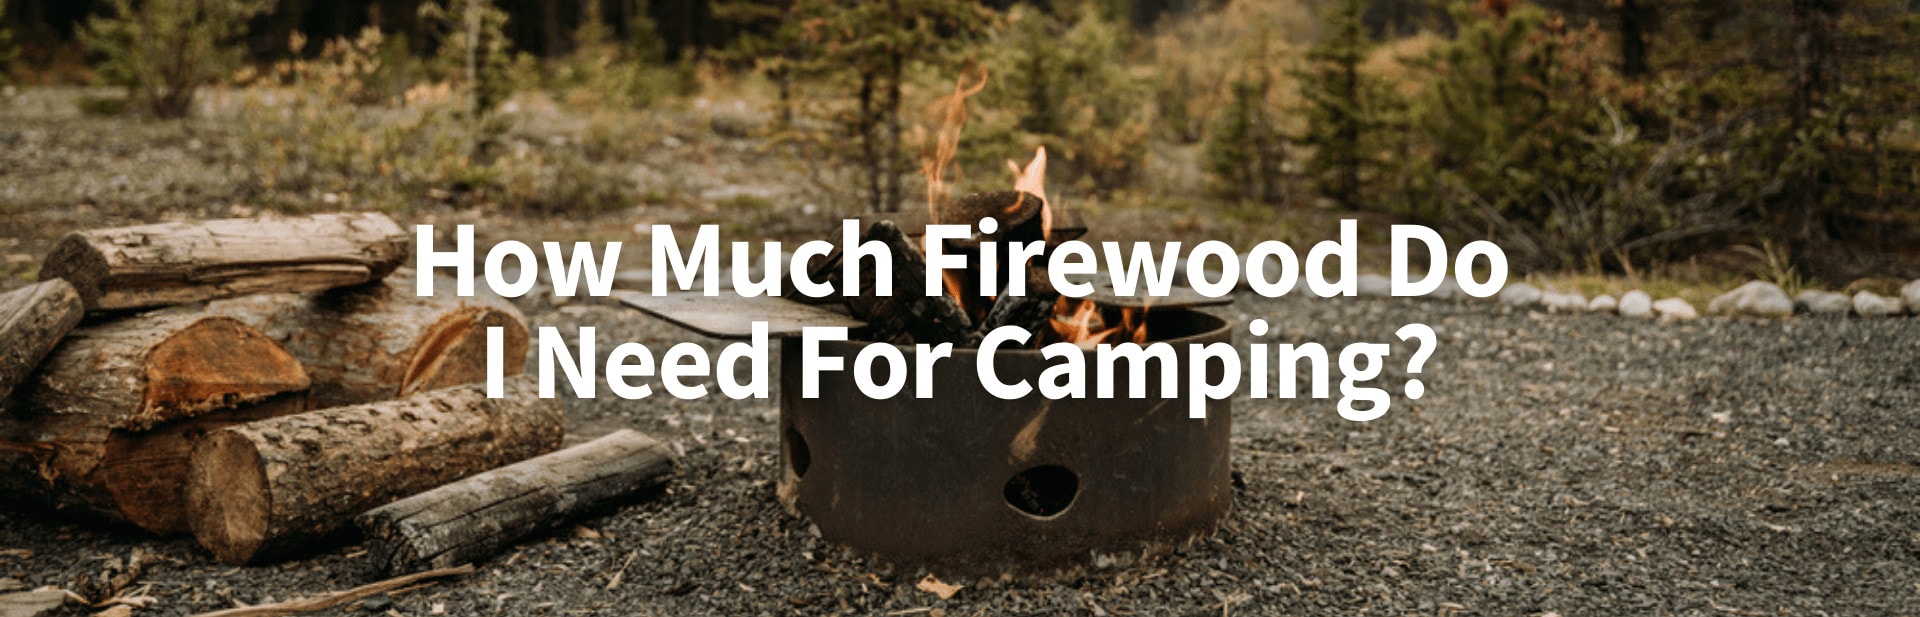 How Much Firewood Do I Need For Camping? Your Questions Answered